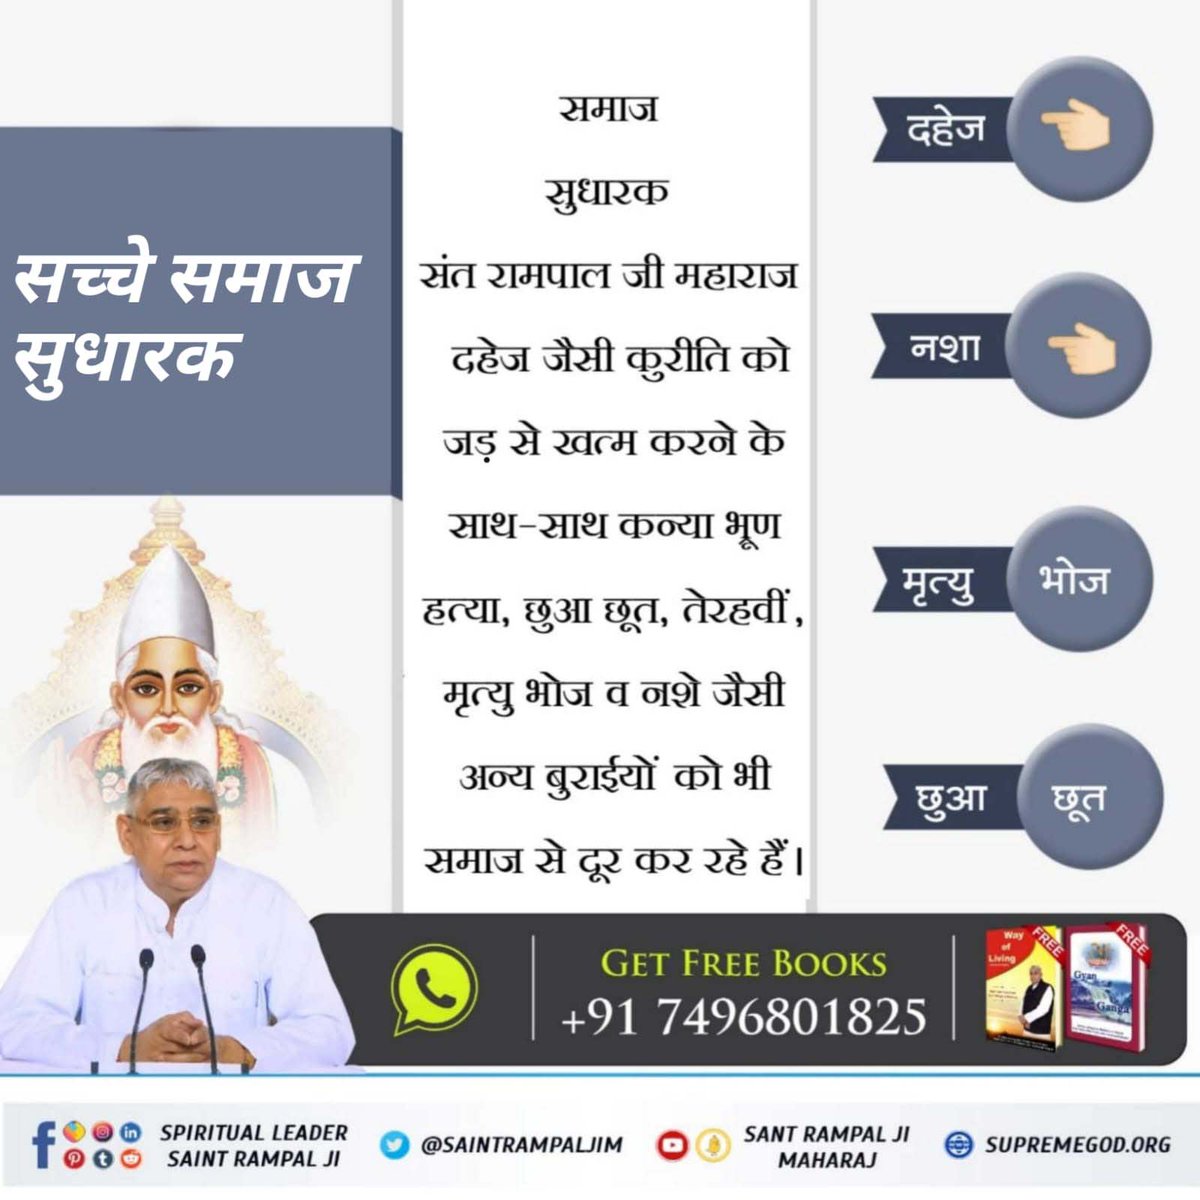 #GodMorningSaturday
#अच्छे_हों_संस्कार_संसार_के बच्चों के
⚡Social Reformer Sant Rampal Ji Maharaj Ji has managed to eradicate curses like intoxication,dowry,corruption,female infanticide,etc from its roots with the help of His spiritual discourses.
Social Reformer Sant RampalJi